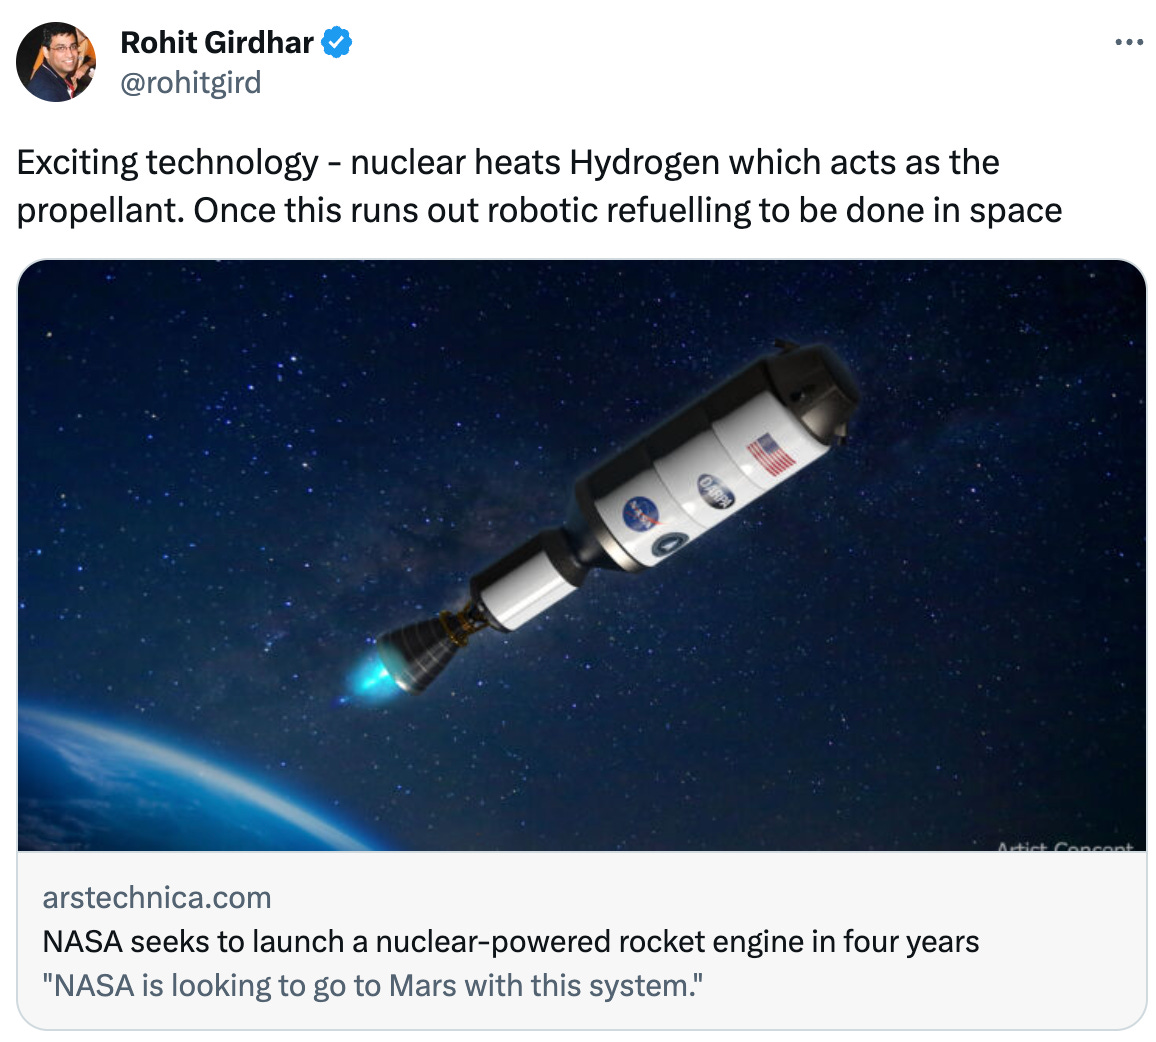  See new Tweets Conversation Rohit Girdhar @rohitgird Exciting technology - nuclear heats Hydrogen which acts as the propellant. Once this runs out robotic refuelling to be done in space arstechnica.com NASA seeks to launch a nuclear-powered rocket engine in four years "NASA is looking to go to Mars with this system." 